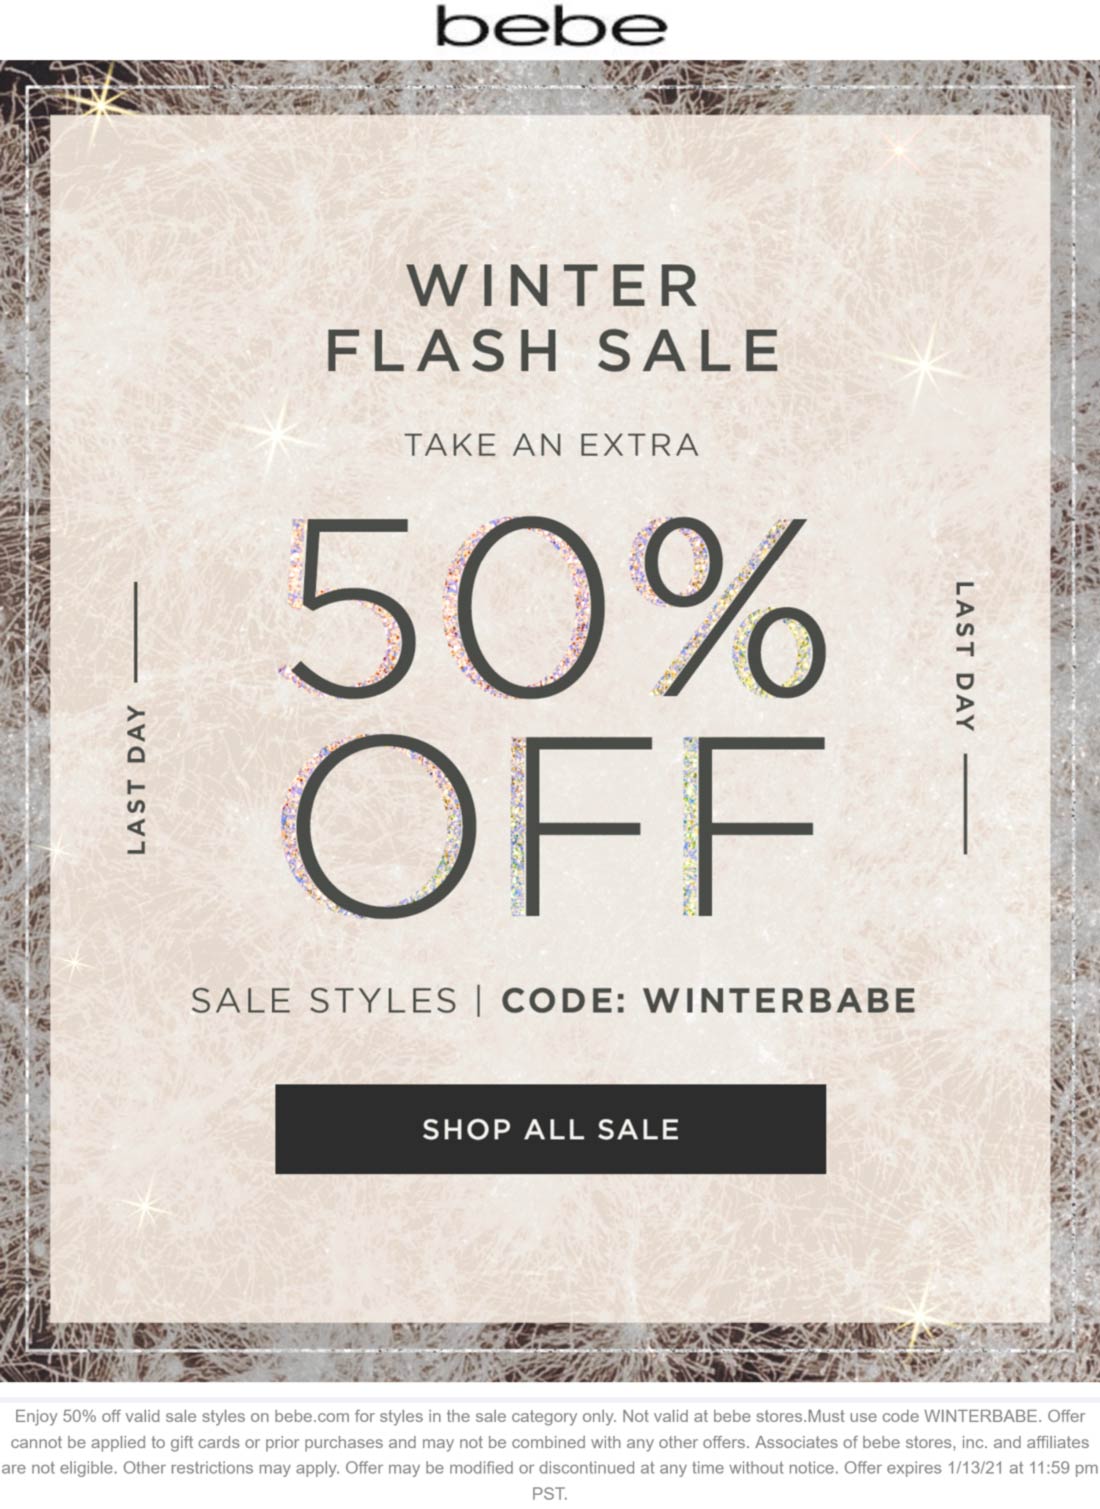 bebe stores Coupon  Extra 50% off sale styles today at bebe via promo code WINTERBABE #bebe 